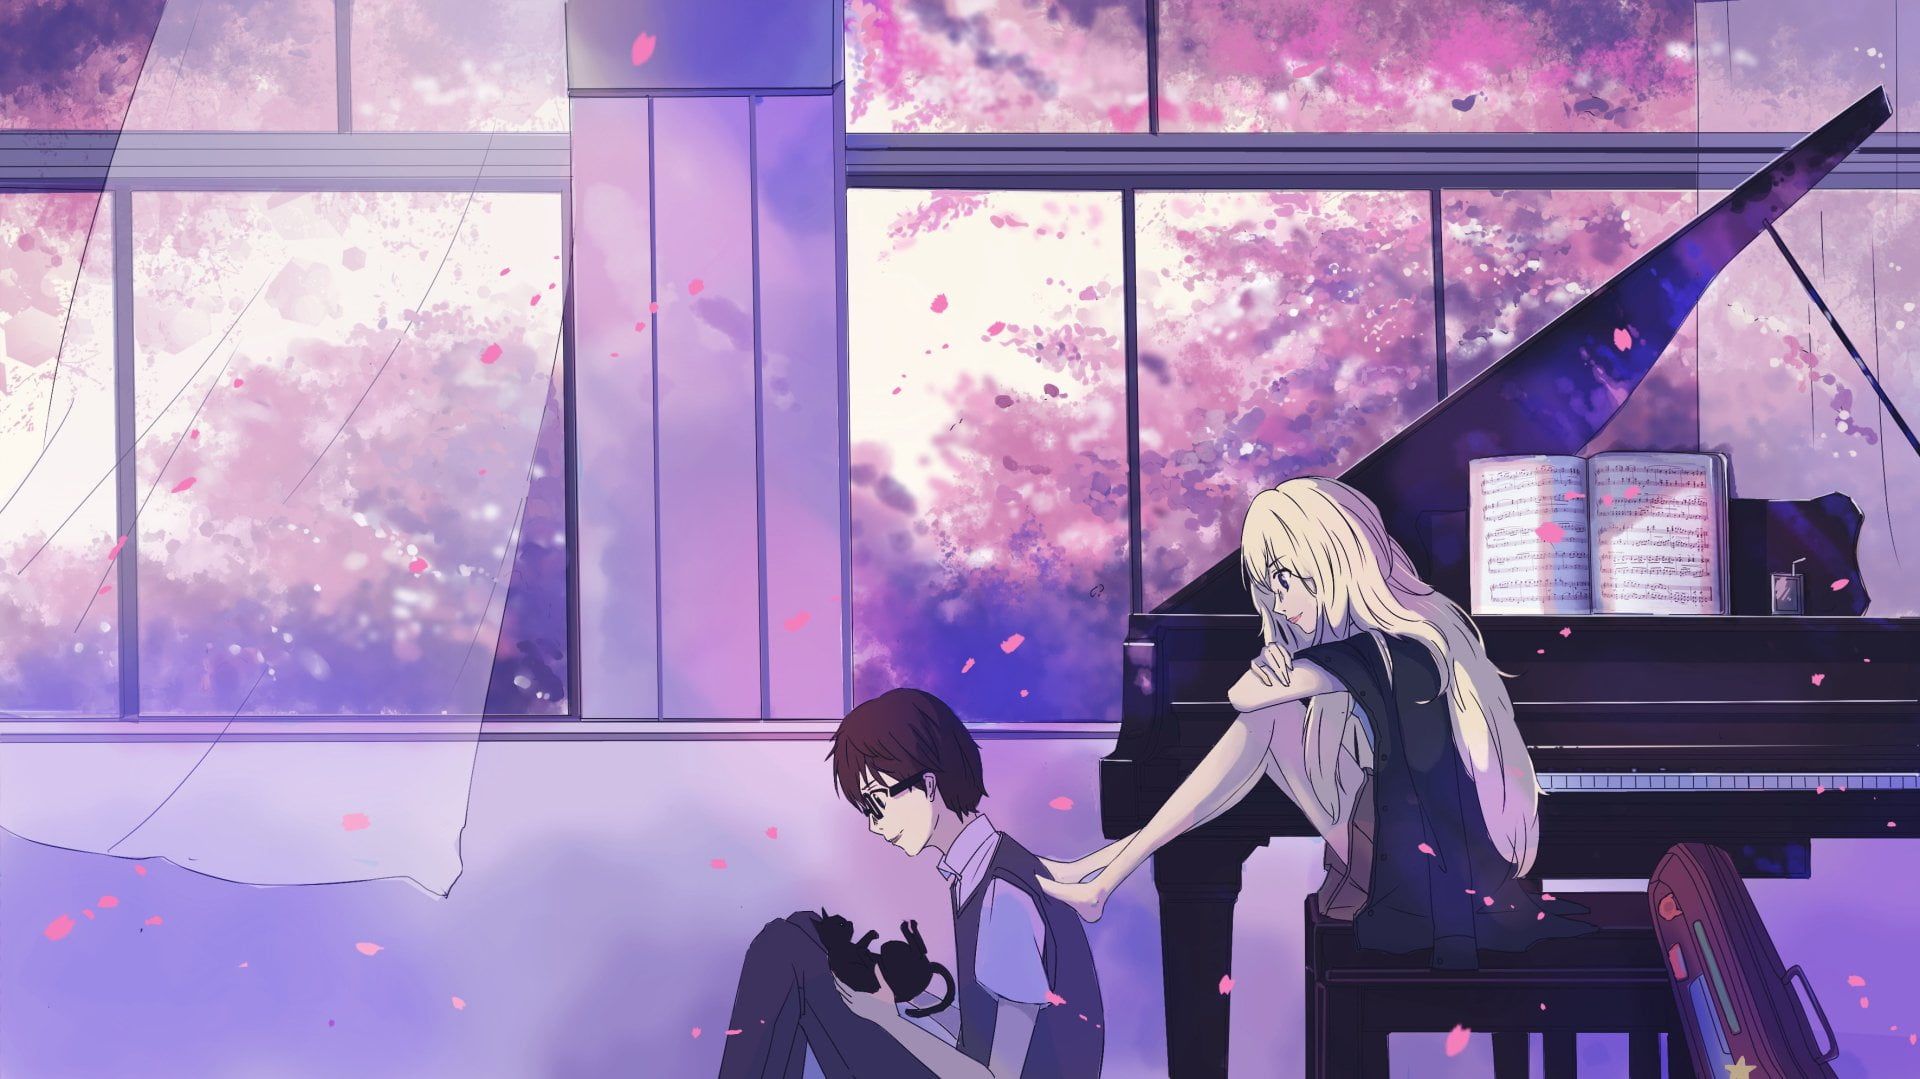  Klavier Anime Hintergrundbild 1920x1079. Wallpaper / built structure, Anime, real people, outdoors, day, Your Lie in April, casual clothing, women, architecture, Kousei Arima, playing, woman, piano, nature free download